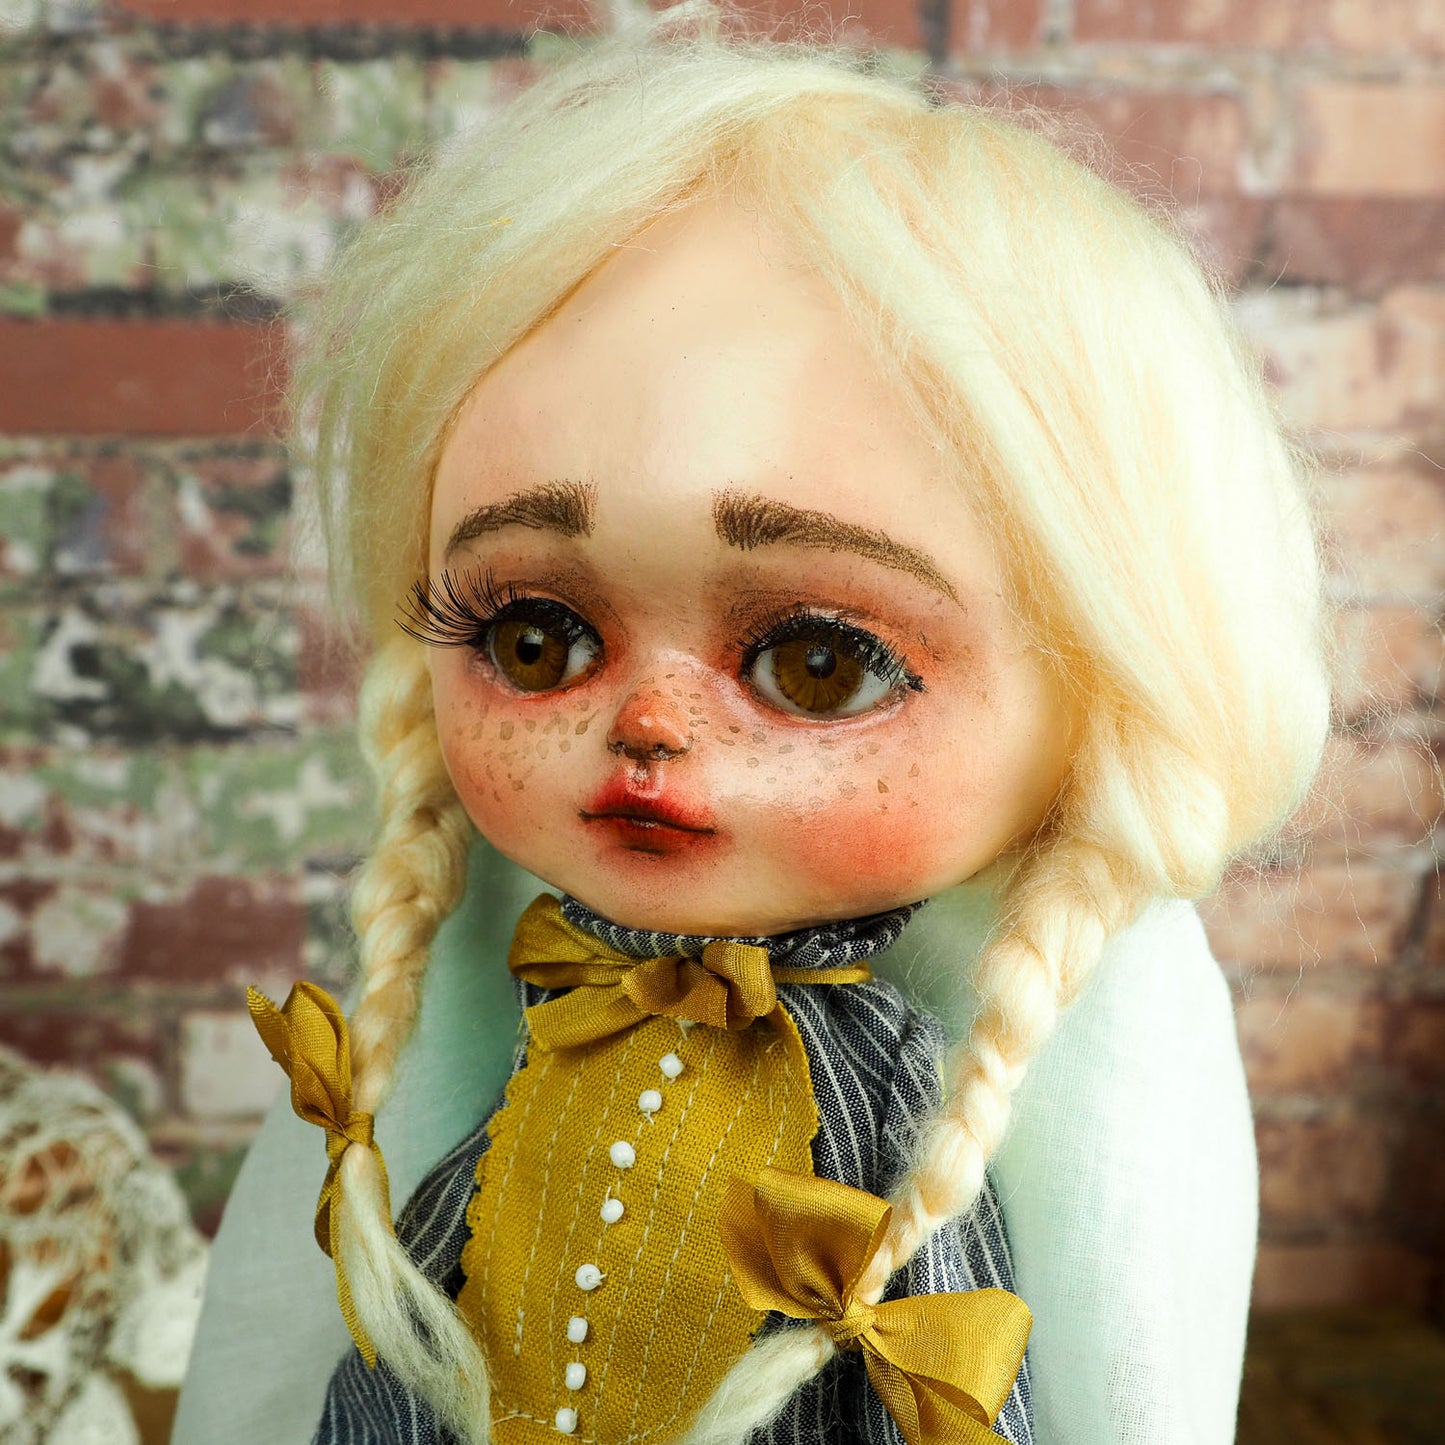 An original hand crafted art doll made by Danita. A blonde girl with a love for music, she plays her vintage vinyl records on her antique gramophone.